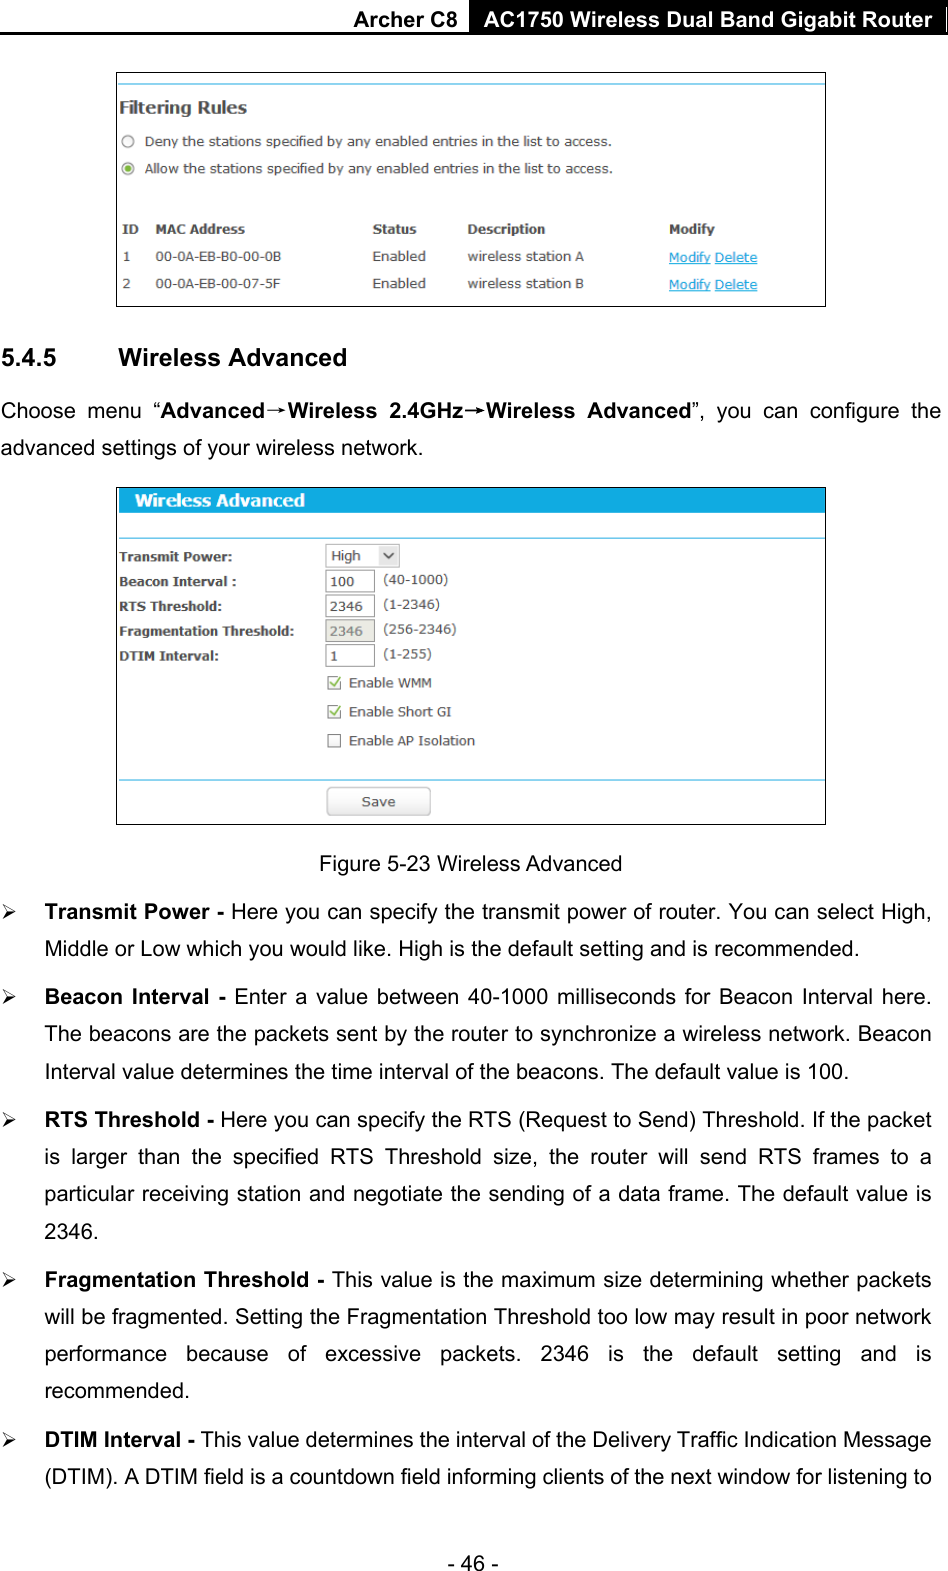 Archer C8 AC1750 Wireless Dual Band Gigabit Router  - 46 -  5.4.5 Wireless Advanced Choose menu “Advanced→Wireless 2.4GHz→Wireless  Advanced”, you can configure the advanced settings of your wireless network.  Figure 5-23 Wireless Advanced  Transmit Power - Here you can specify the transmit power of router. You can select High, Middle or Low which you would like. High is the default setting and is recommended.  Beacon Interval -  Enter a value between 40-1000 milliseconds for Beacon Interval here. The beacons are the packets sent by the router to synchronize a wireless network. Beacon Interval value determines the time interval of the beacons. The default value is 100.    RTS Threshold - Here you can specify the RTS (Request to Send) Threshold. If the packet is larger than the specified RTS Threshold size, the router  will send RTS frames to a particular receiving station and negotiate the sending of a data frame. The default value is 2346.    Fragmentation Threshold - This value is the maximum size determining whether packets will be fragmented. Setting the Fragmentation Threshold too low may result in poor network performance because of excessive packets. 2346 is the default setting and is recommended.    DTIM Interval - This value determines the interval of the Delivery Traffic Indication Message (DTIM). A DTIM field is a countdown field informing clients of the next window for listening to 